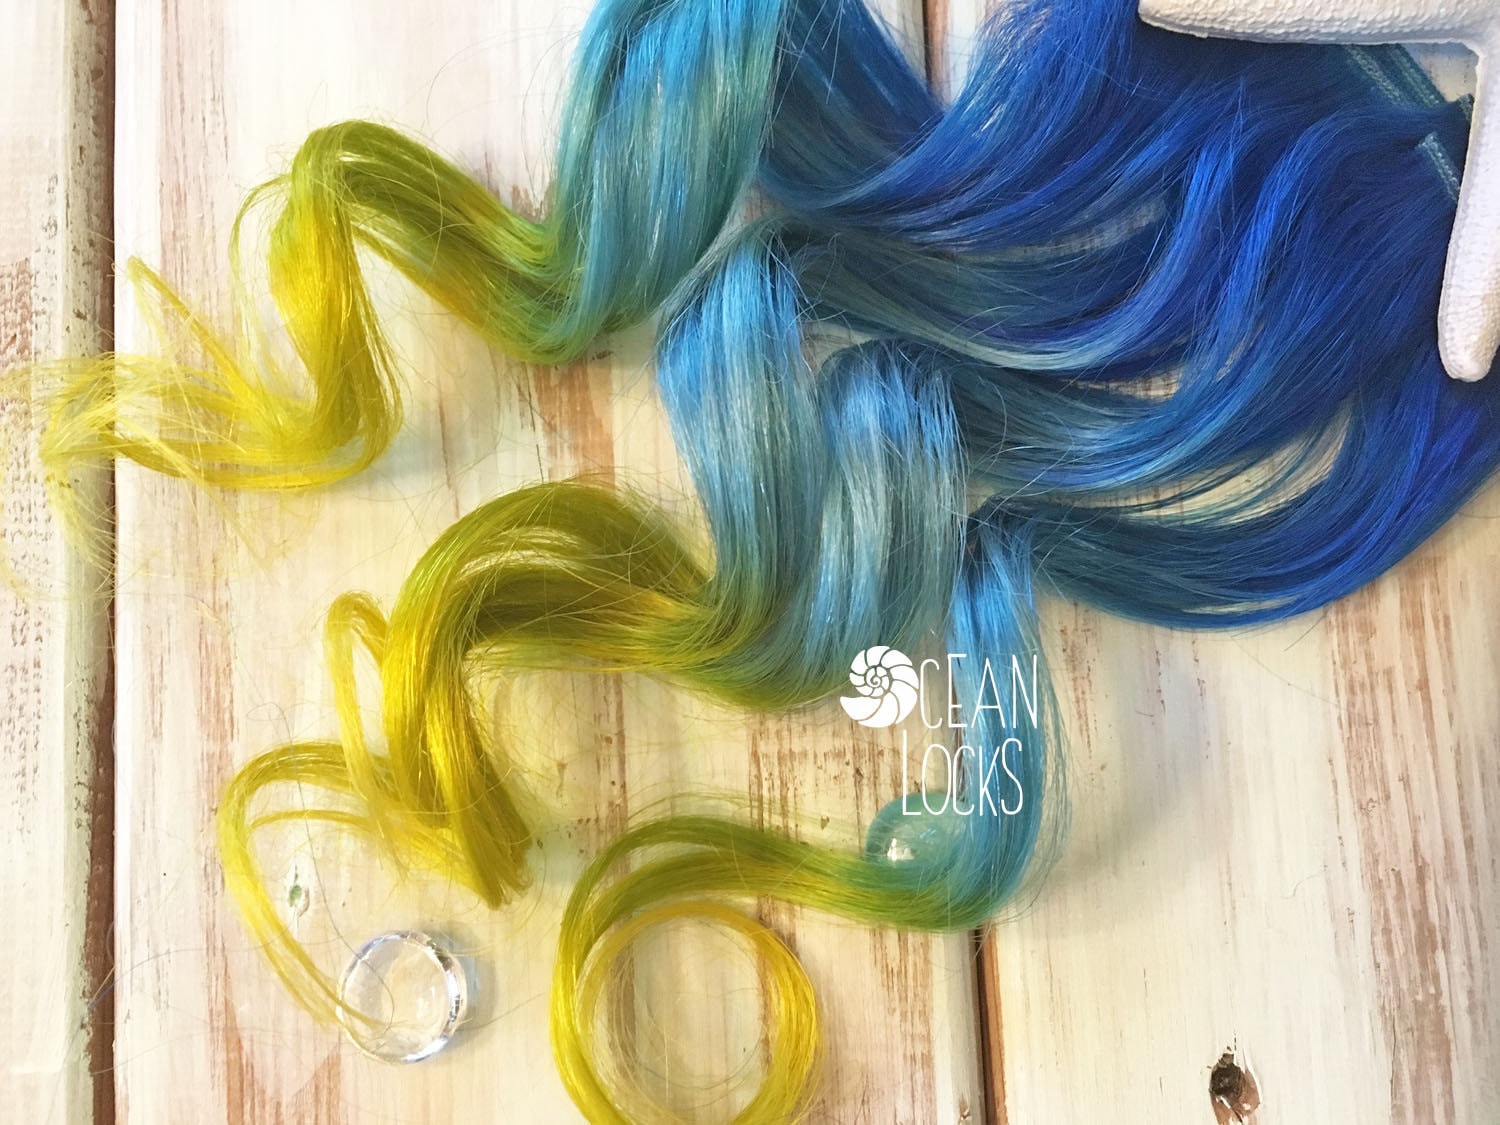 6. 4n over blue hair extensions - wide 8